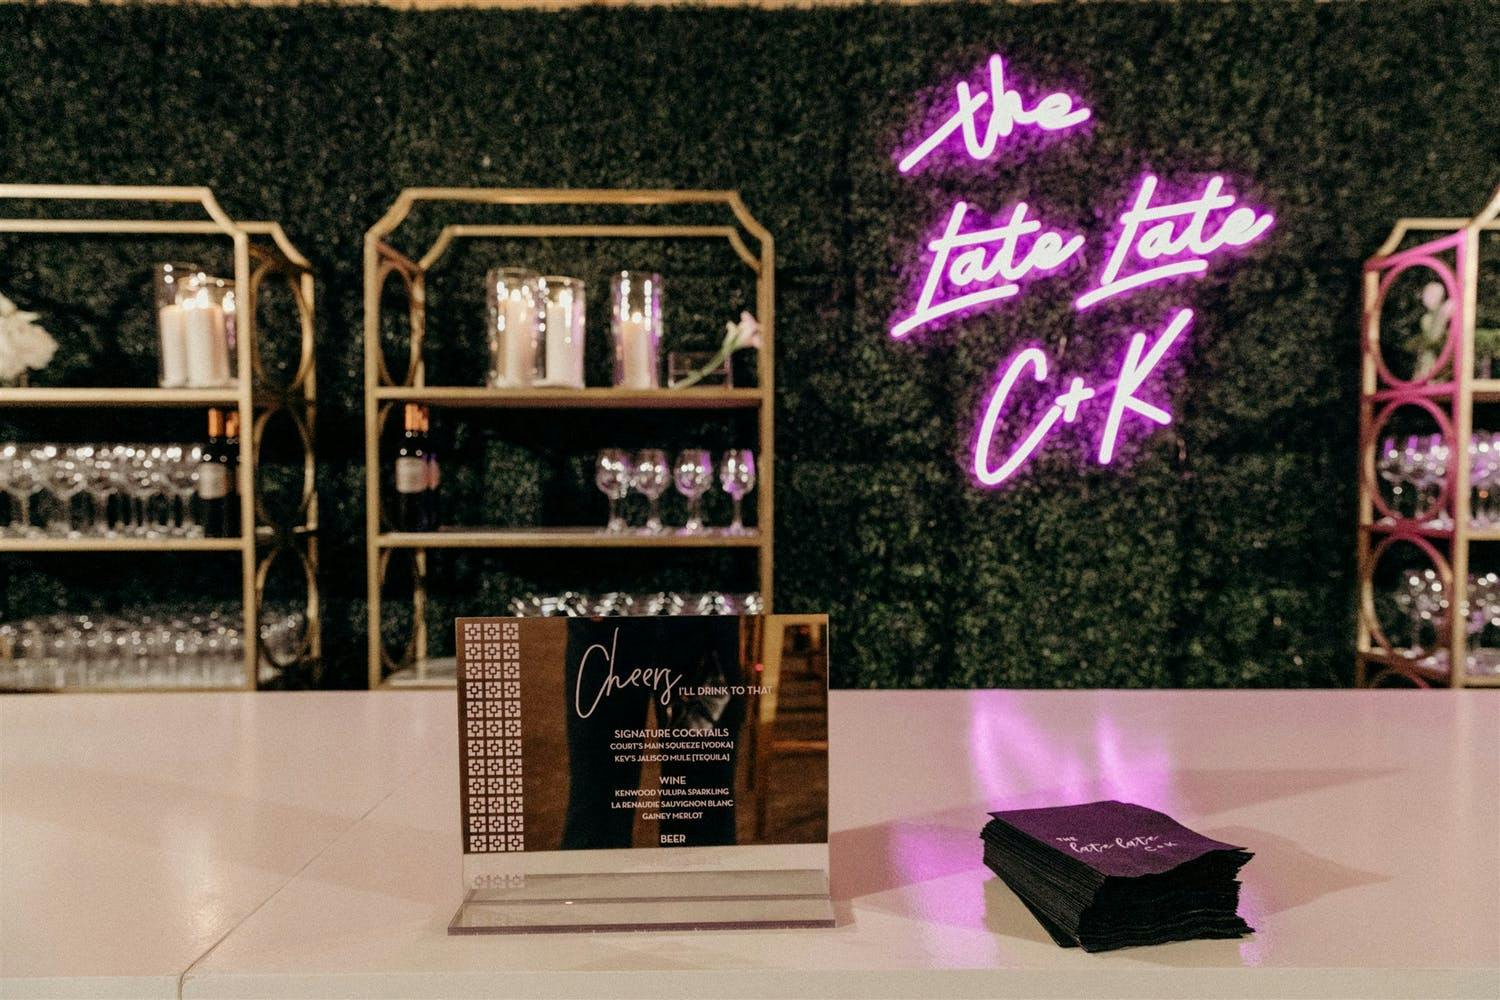 Wedding Bar With PInk Neon Lighting Signage | PartySlate